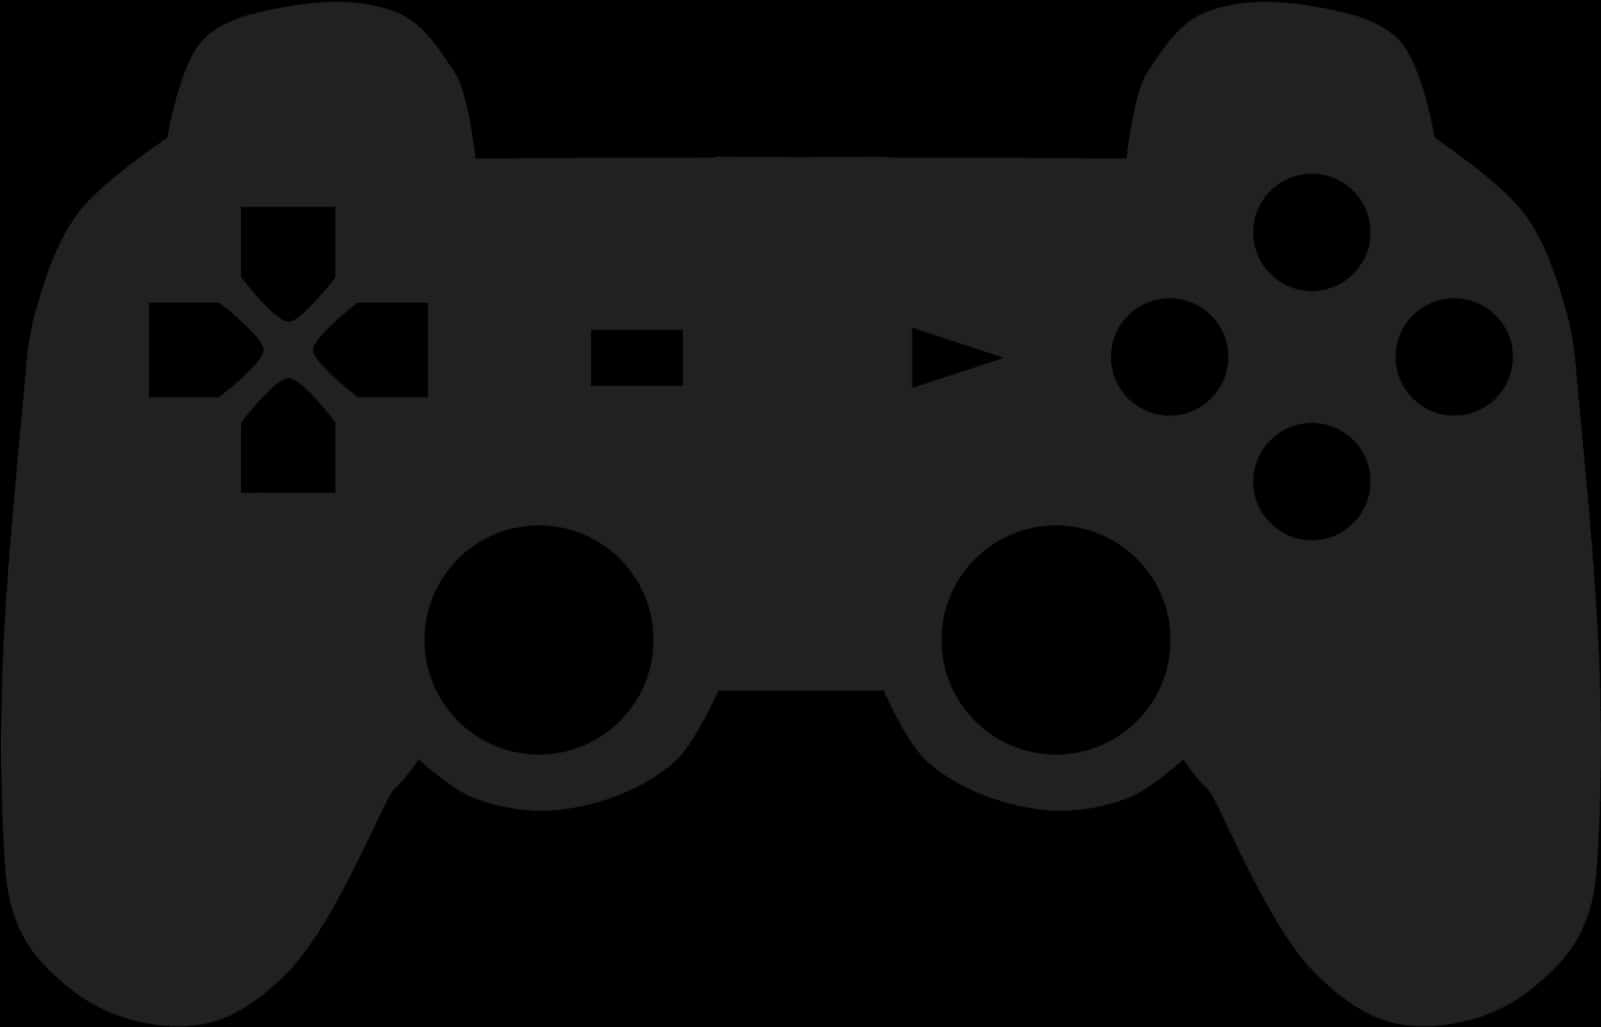 Generic Game Controller Silhouette PNG image